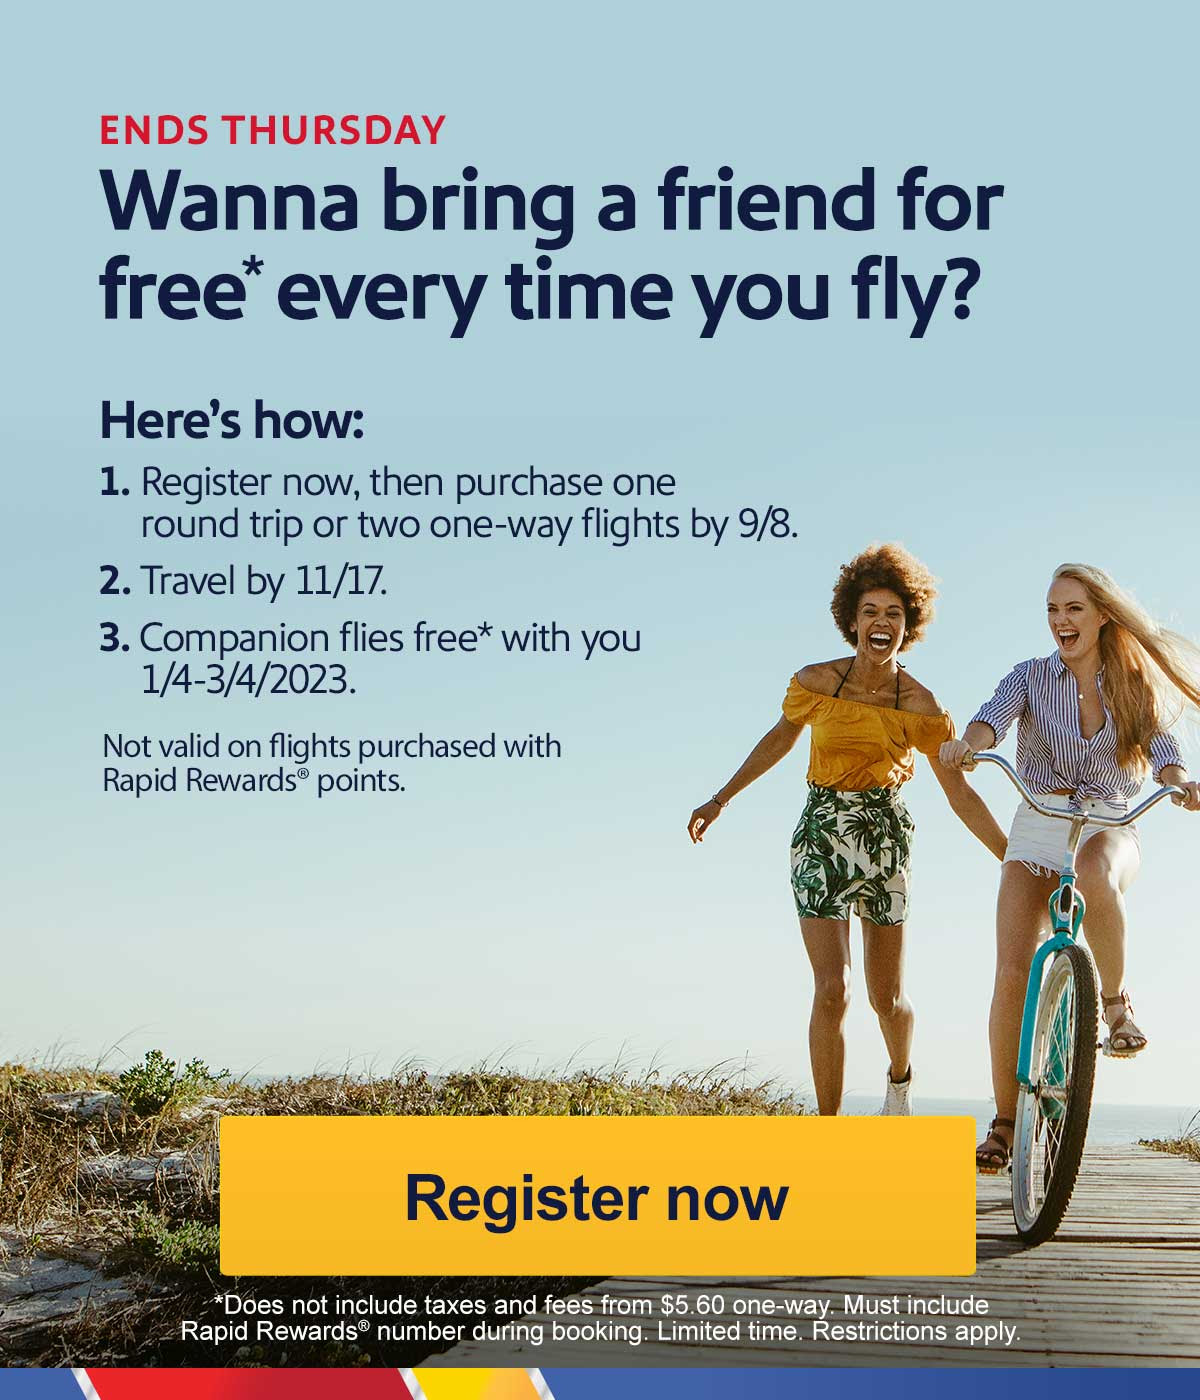 ENDS THURSDAY Wanna bring a friend for free* every time you fly? 1. Register now, then purchase one round trip or two one-way flights by 9/8. 2. Travel by 11/17. 3. Companion flies free* with you 1/4-3/4/2023. Not valid on flights purchased with Rapid Rewards points. [Book now] *Does not include taxes and fees from $5.60 one-way. Must include Rapid Rewards number during booking. Limited time. Restrictions apply.